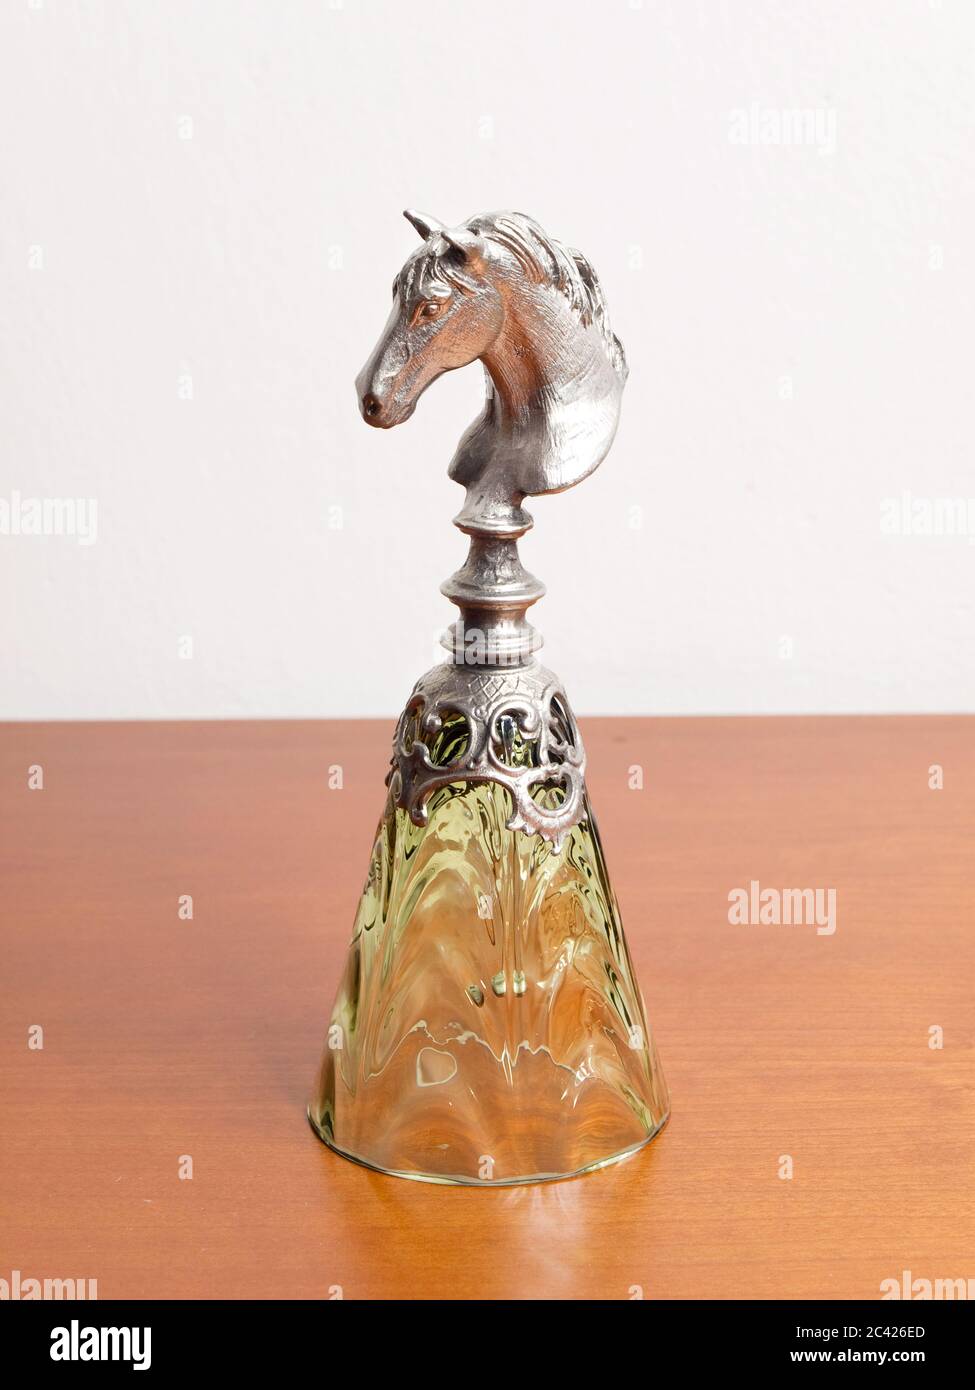 Glass bell with horse head grip Stock Photo